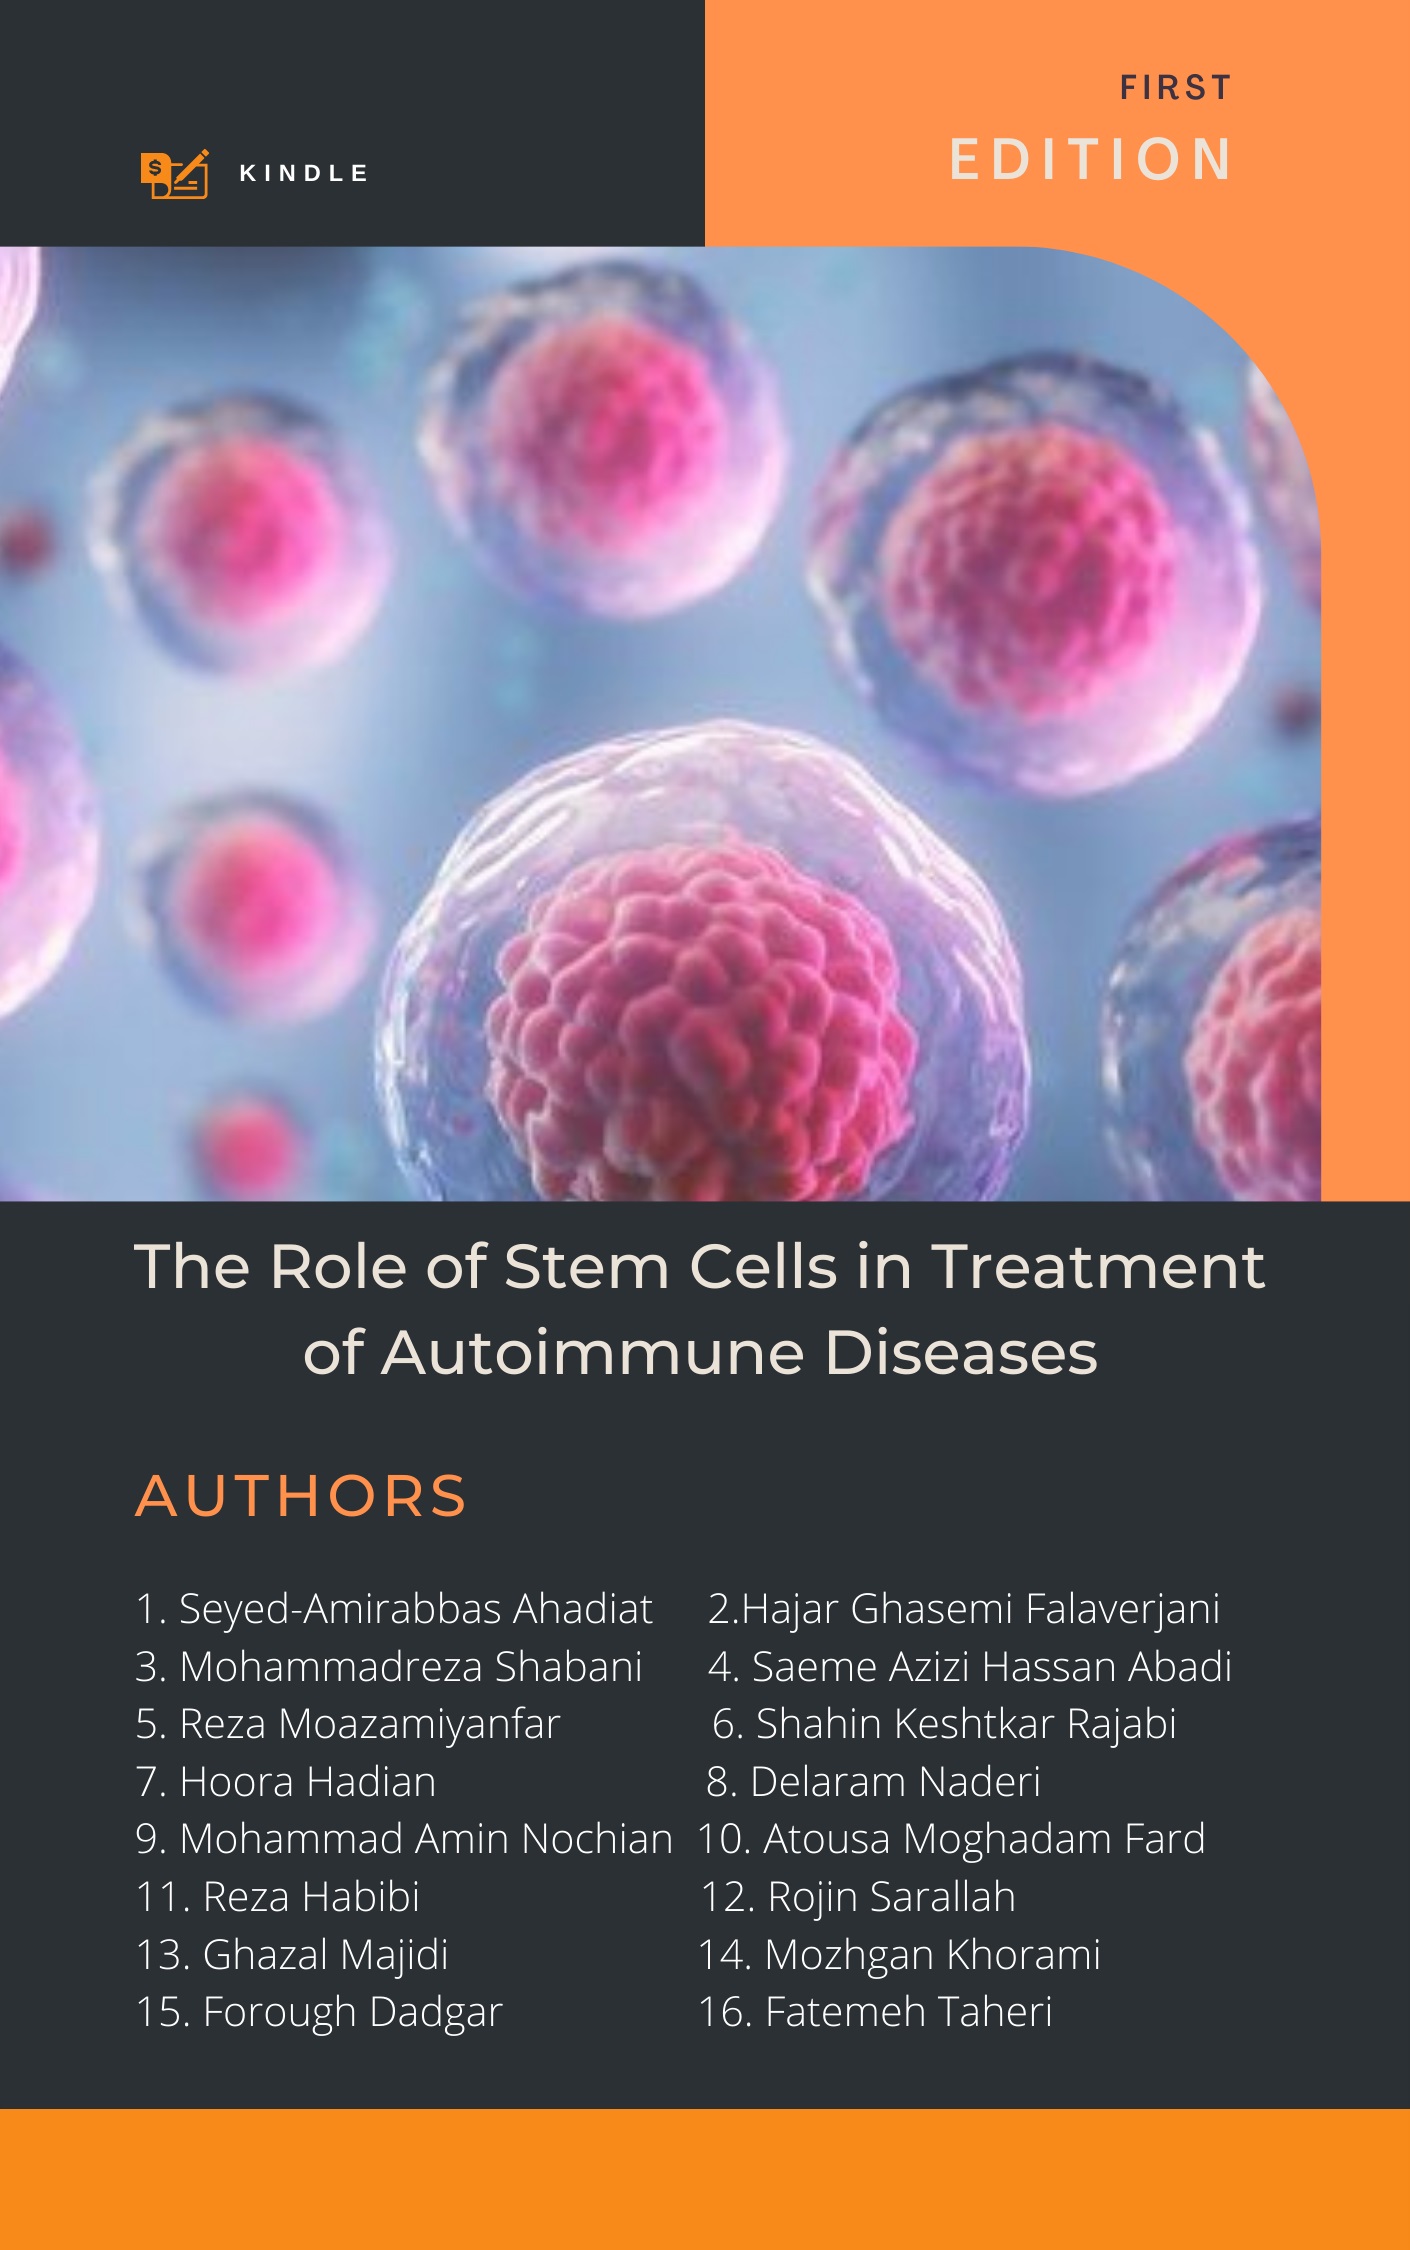 The Role of Stem Cells in Treatment of Autoimmune Diseases